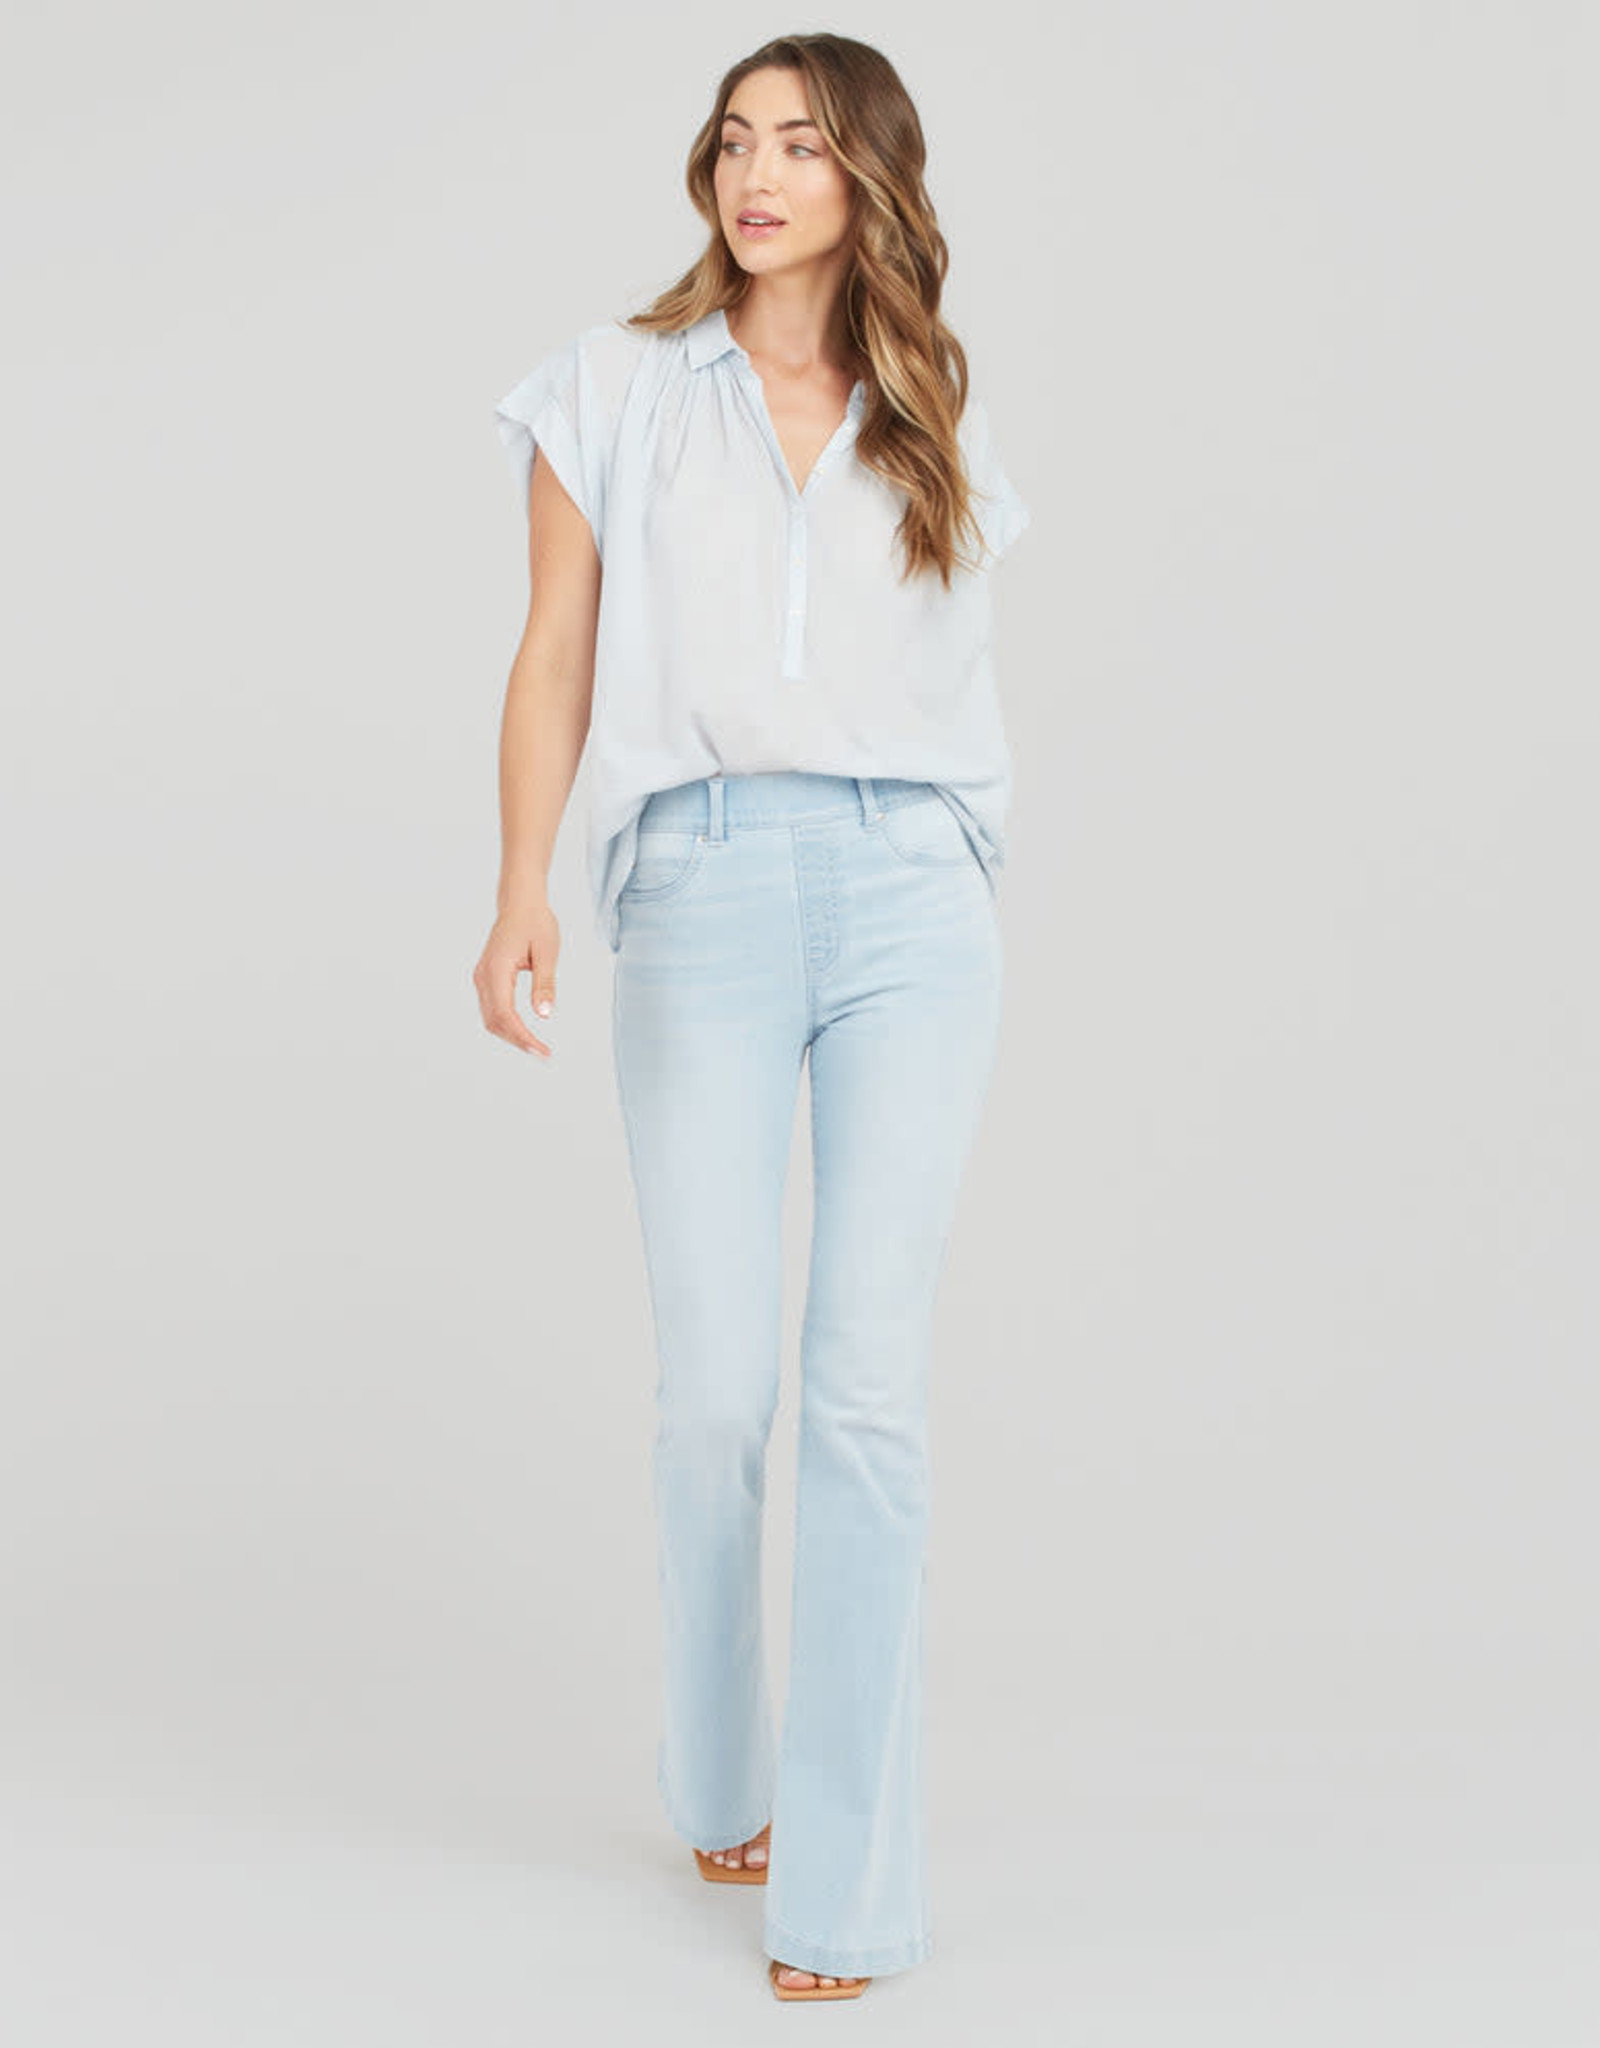 Spanx flare jeans 20348R